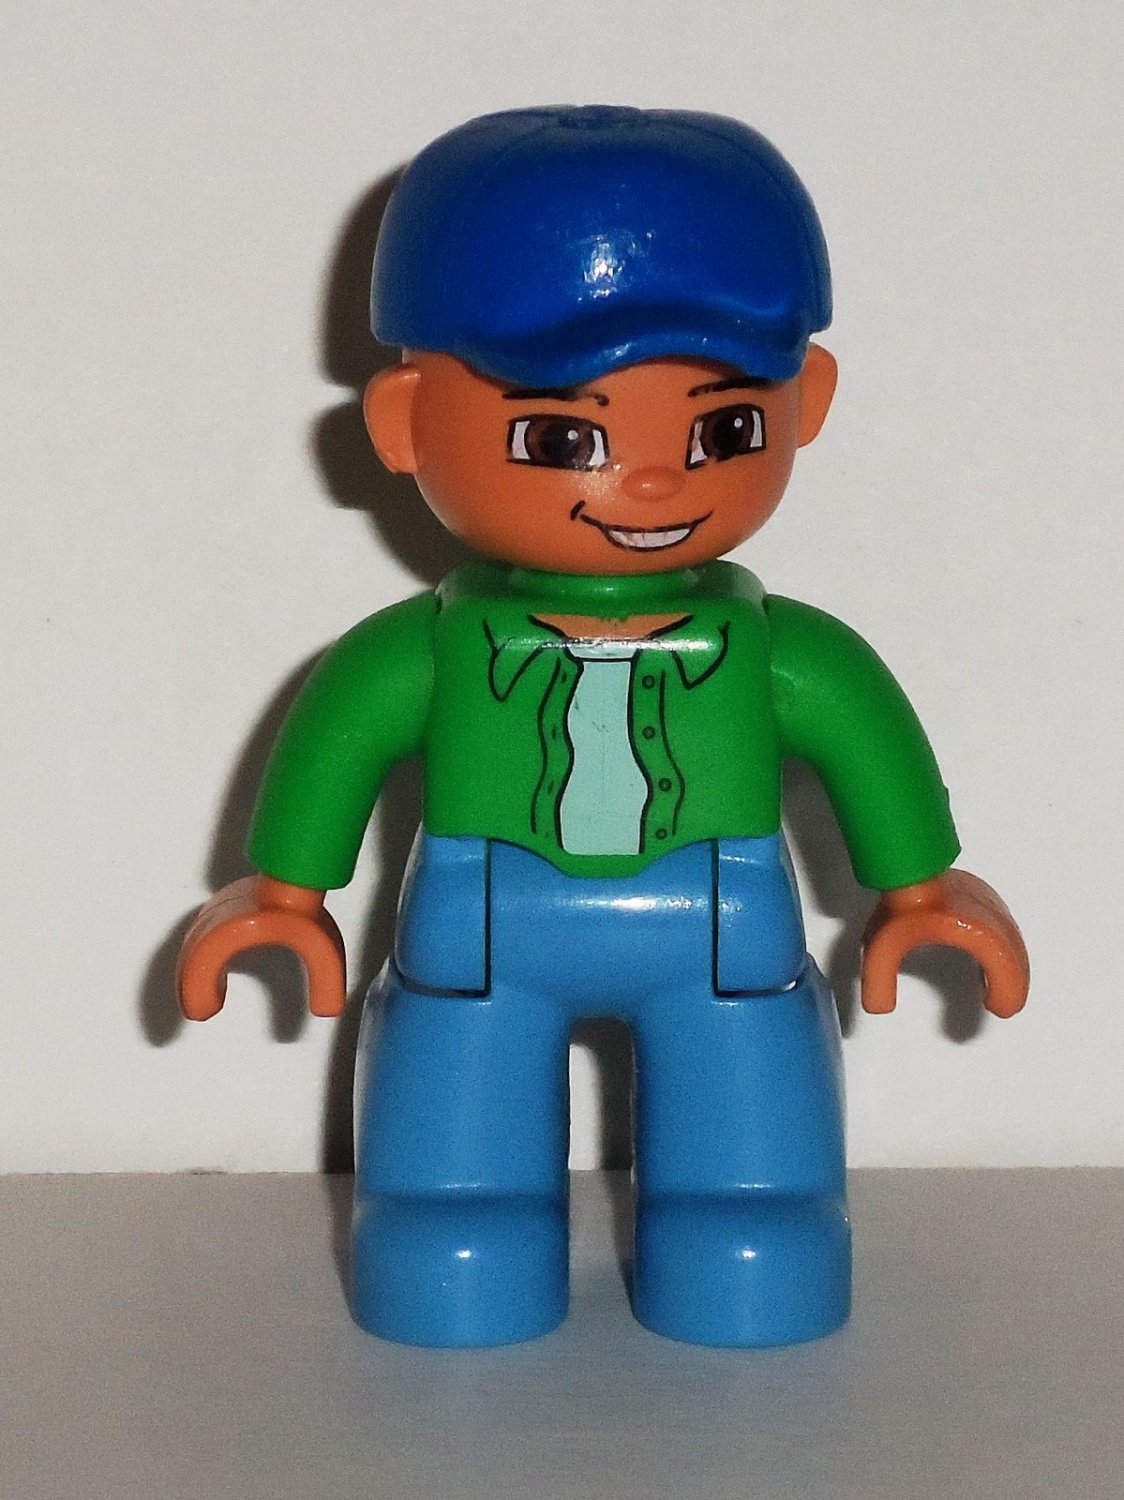 Lego Duplo Lego Ville Boy Figure w/ Blue Cap and Green Shirt Loose Used